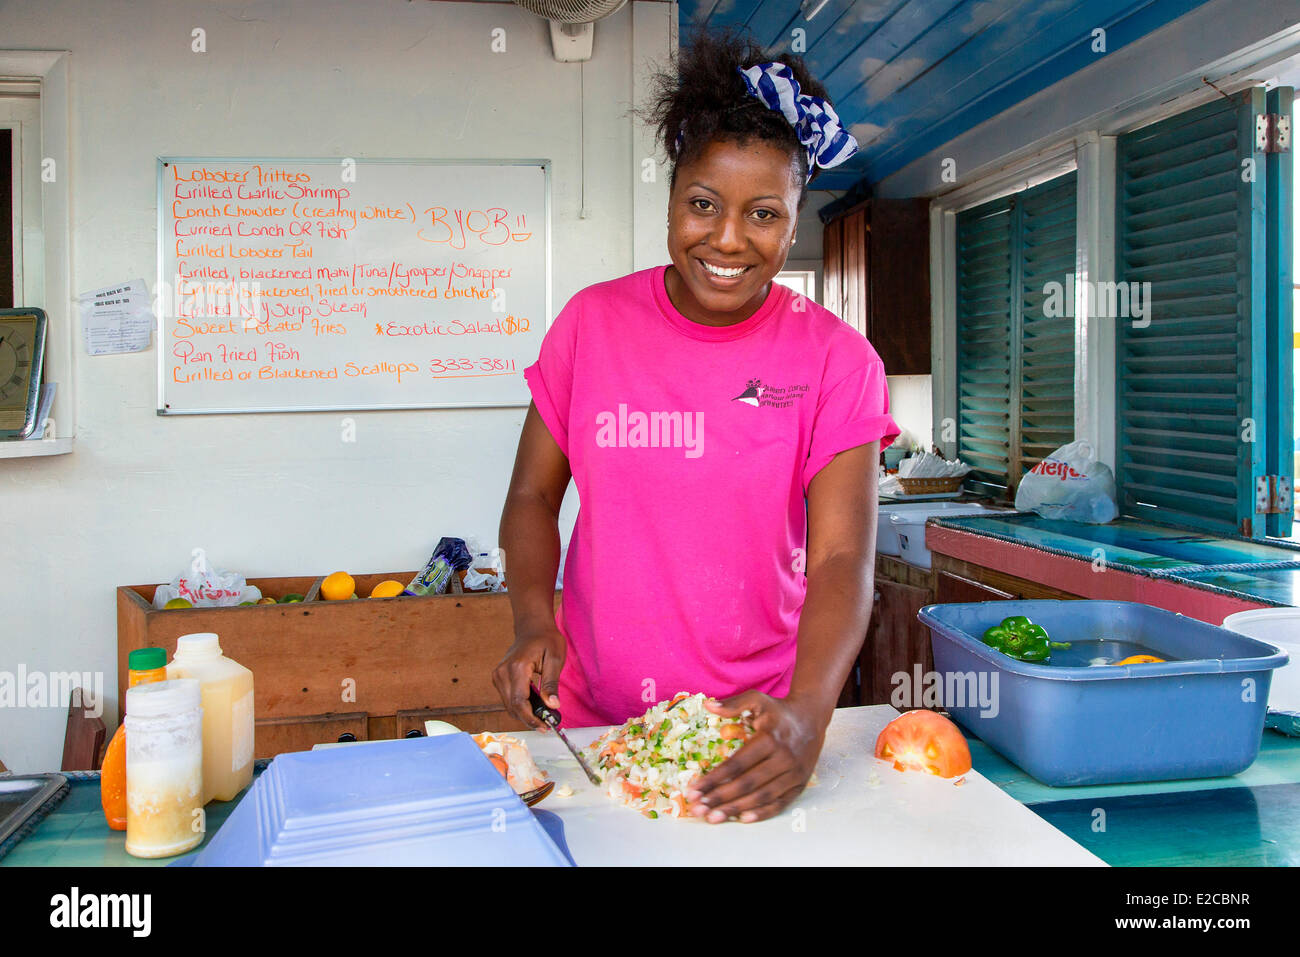 Bahamas, Harbour Island, Queen Conch Restaurant known for its Conch Salads Stock Photo